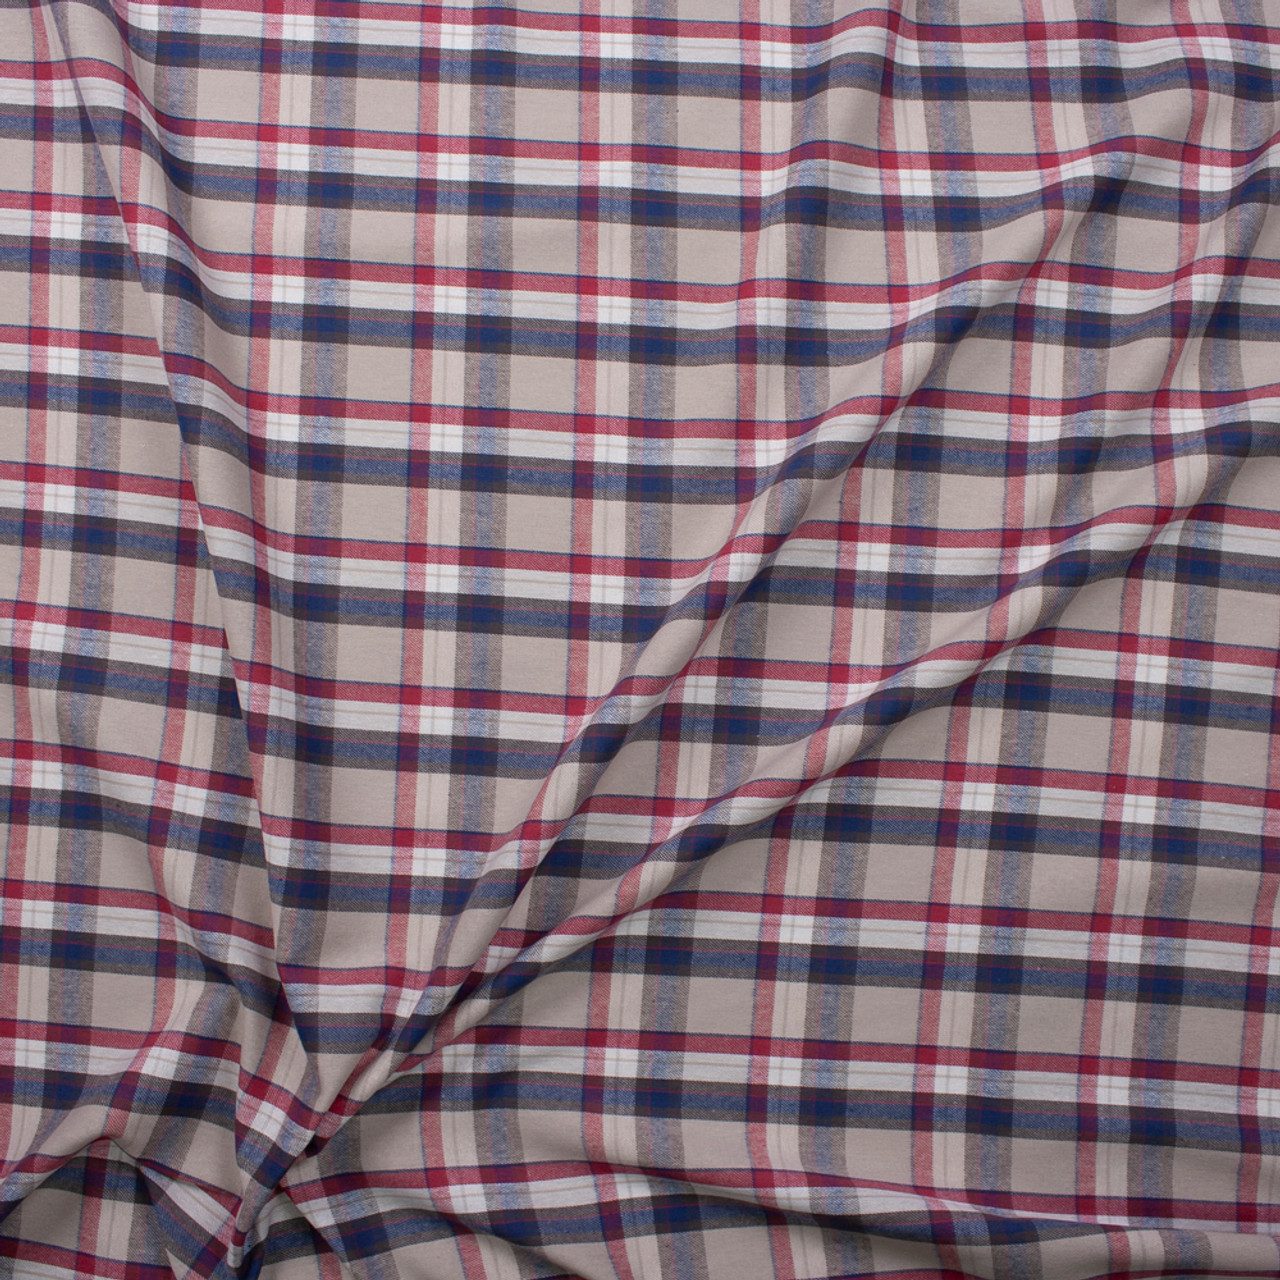 Cali Fabrics Red, White, Grey, and Blue Plaid Cotton Flannel